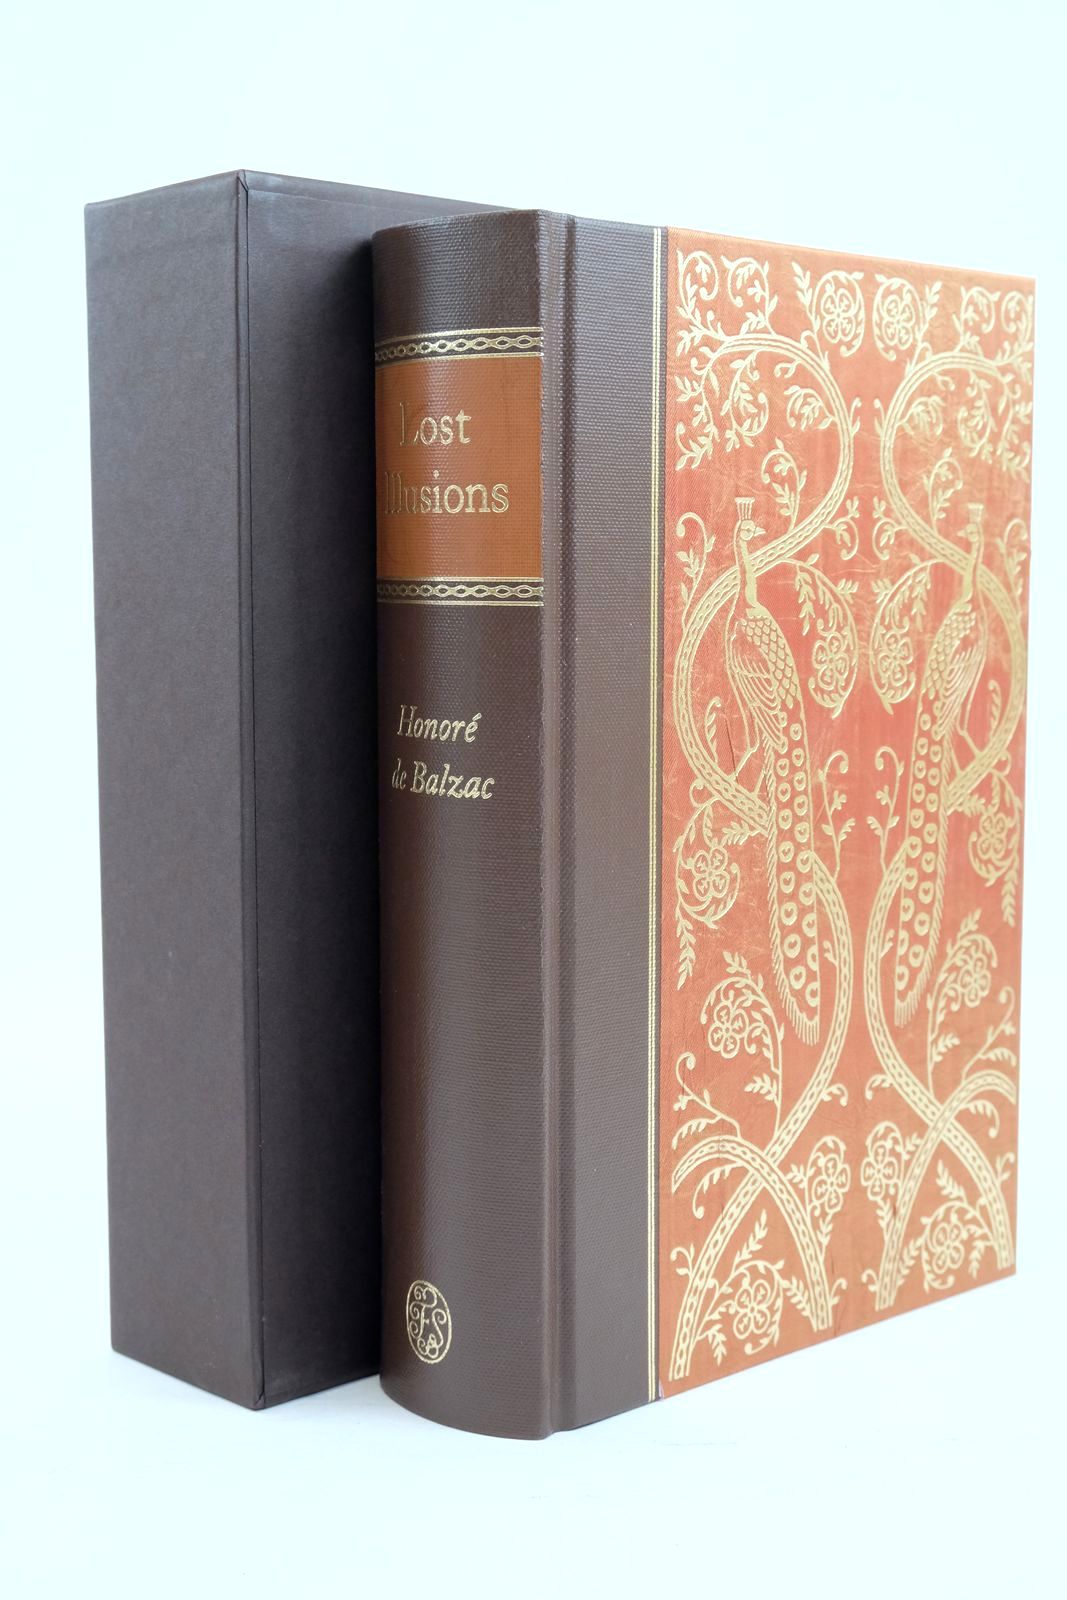 Photo of LOST ILLUSIONS written by De Balzac, Honore Hunt, Herbert J. Robb, Graham illustrated by Mosley, Francis published by Folio Society (STOCK CODE: 1320846)  for sale by Stella & Rose's Books